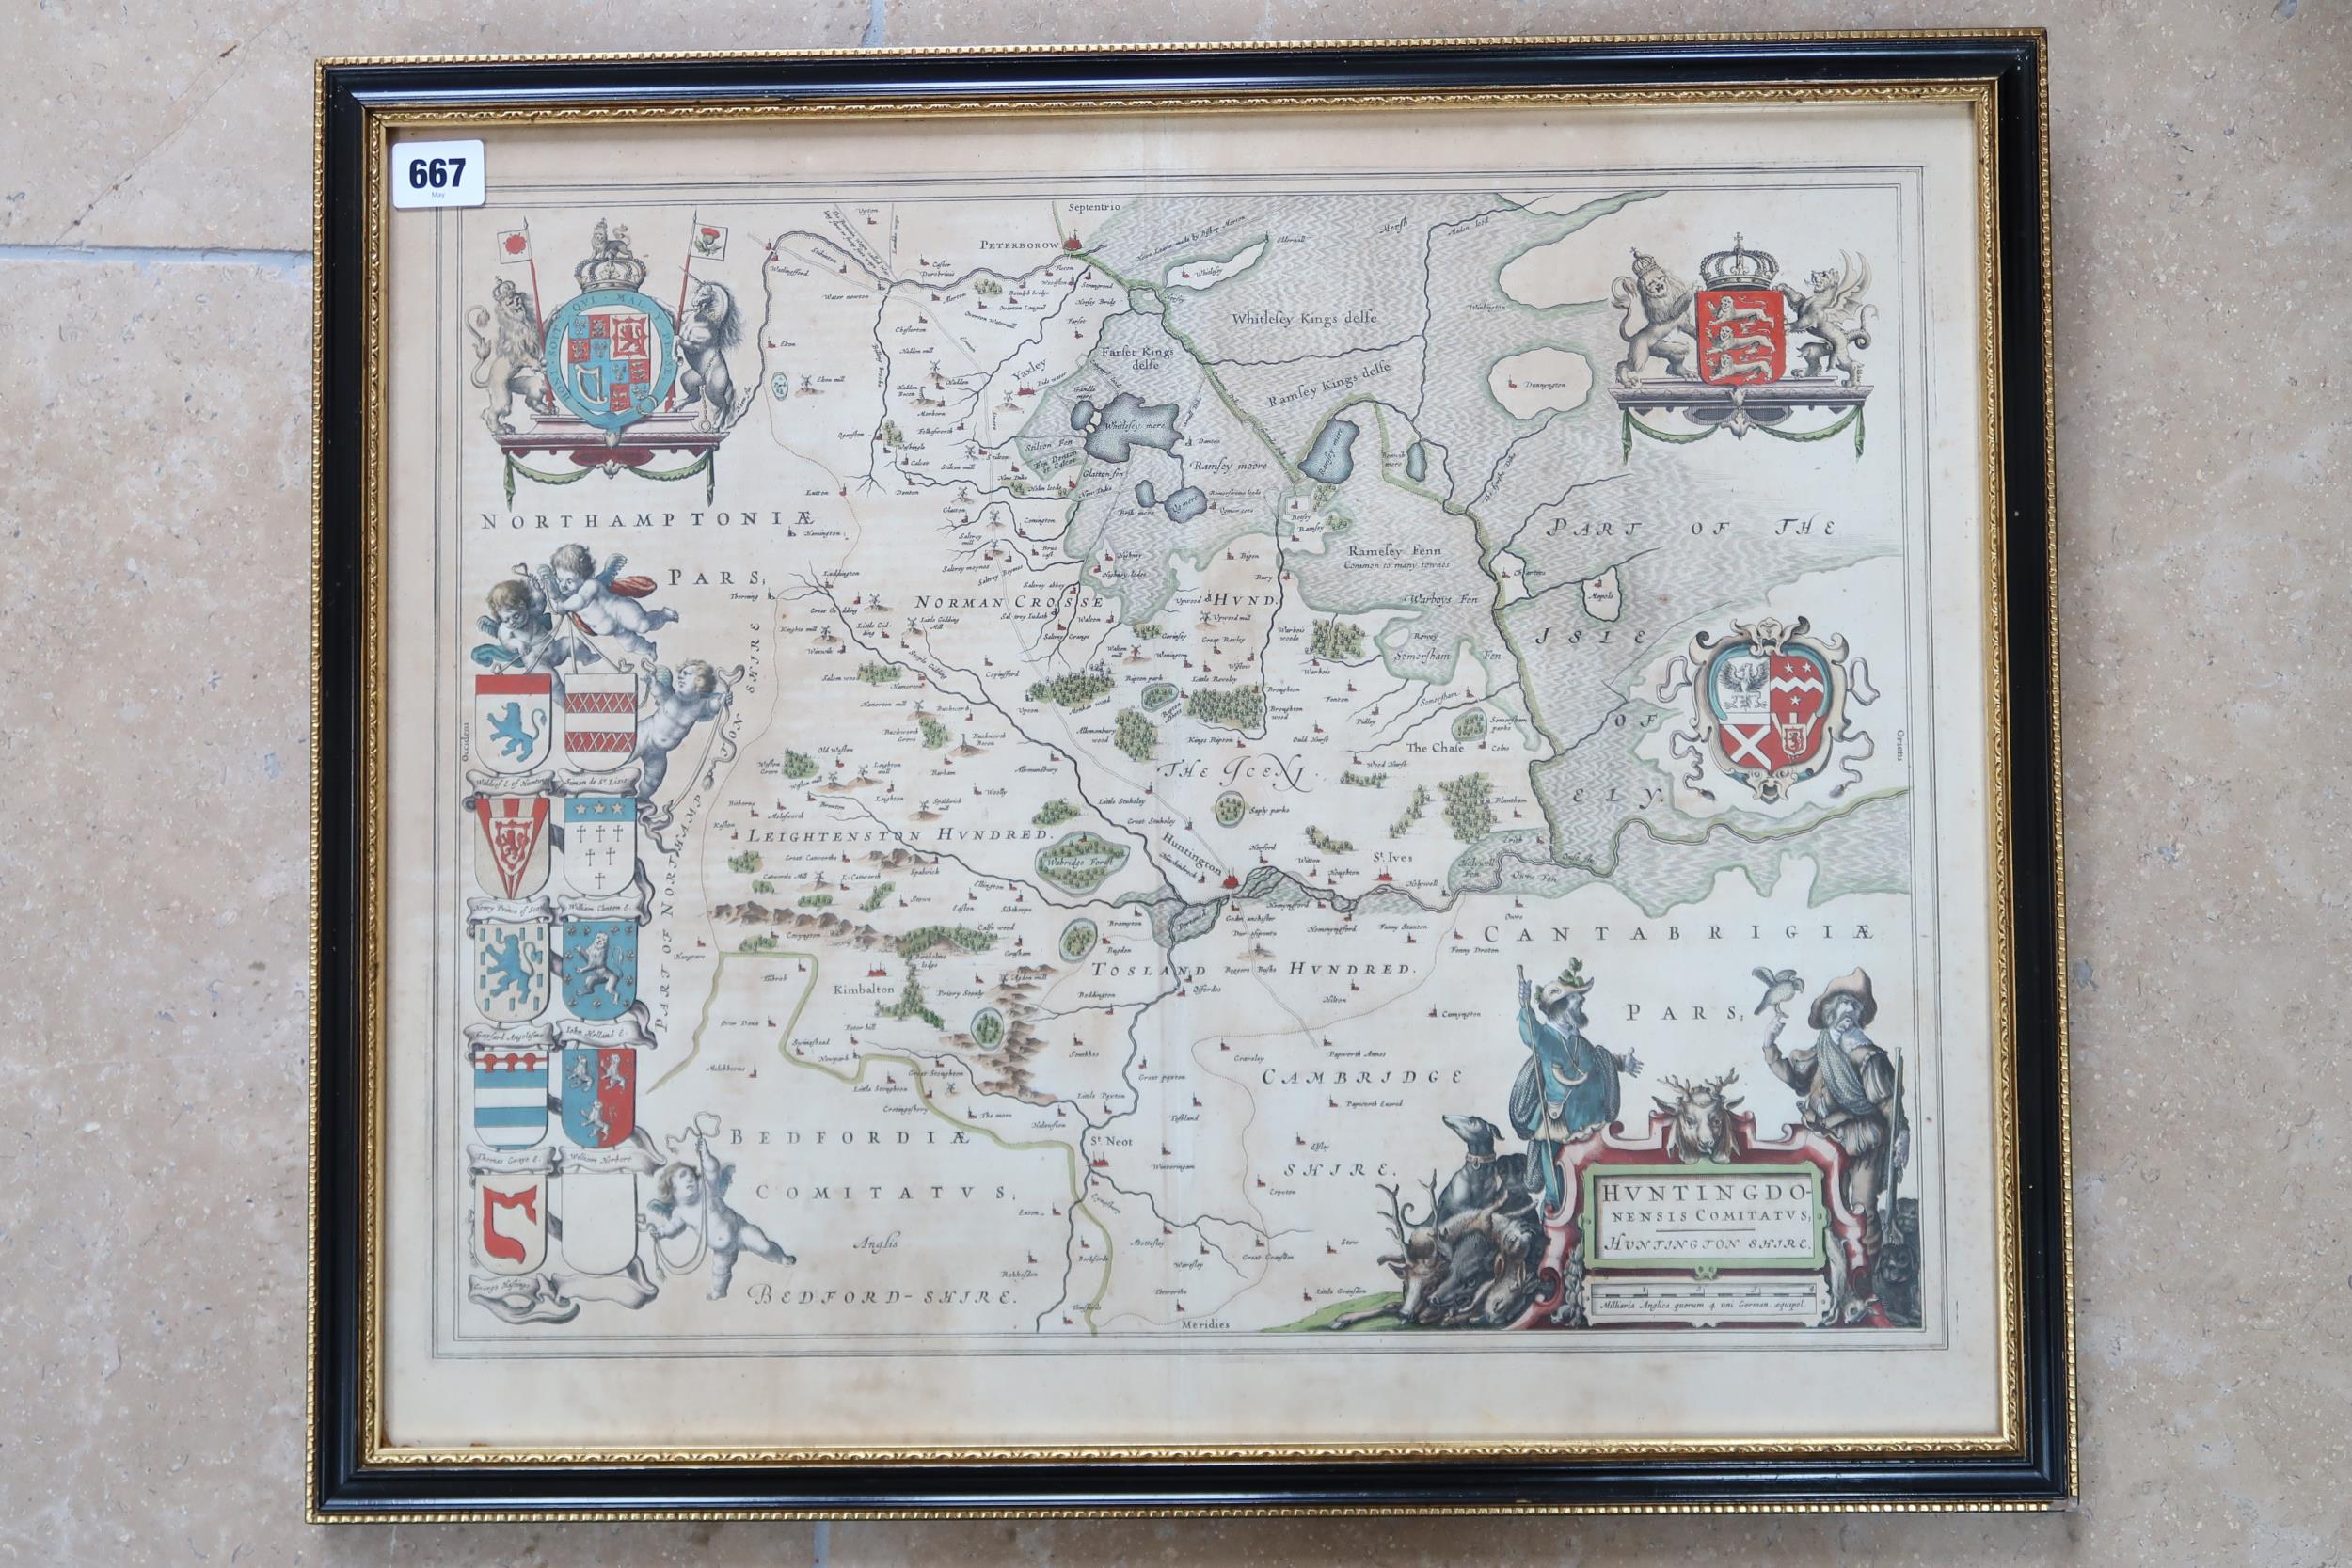 A framed map of Huntingdonshire by Blaeu - double sided - 53cm x 44cm - 1647